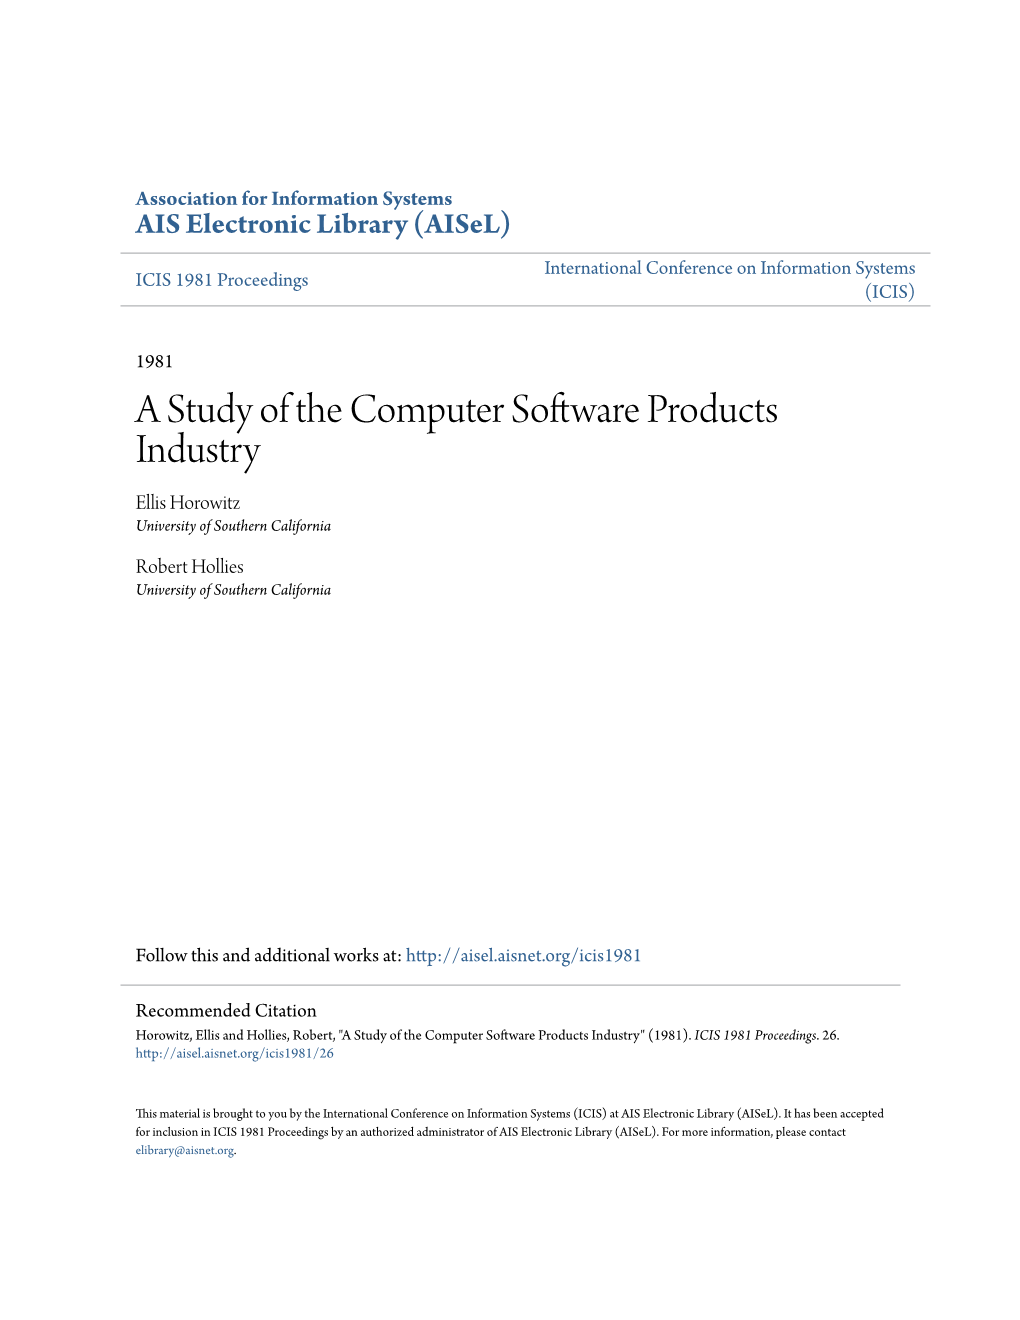 A Study of the Computer Software Products Industry Ellis Horowitz University of Southern California